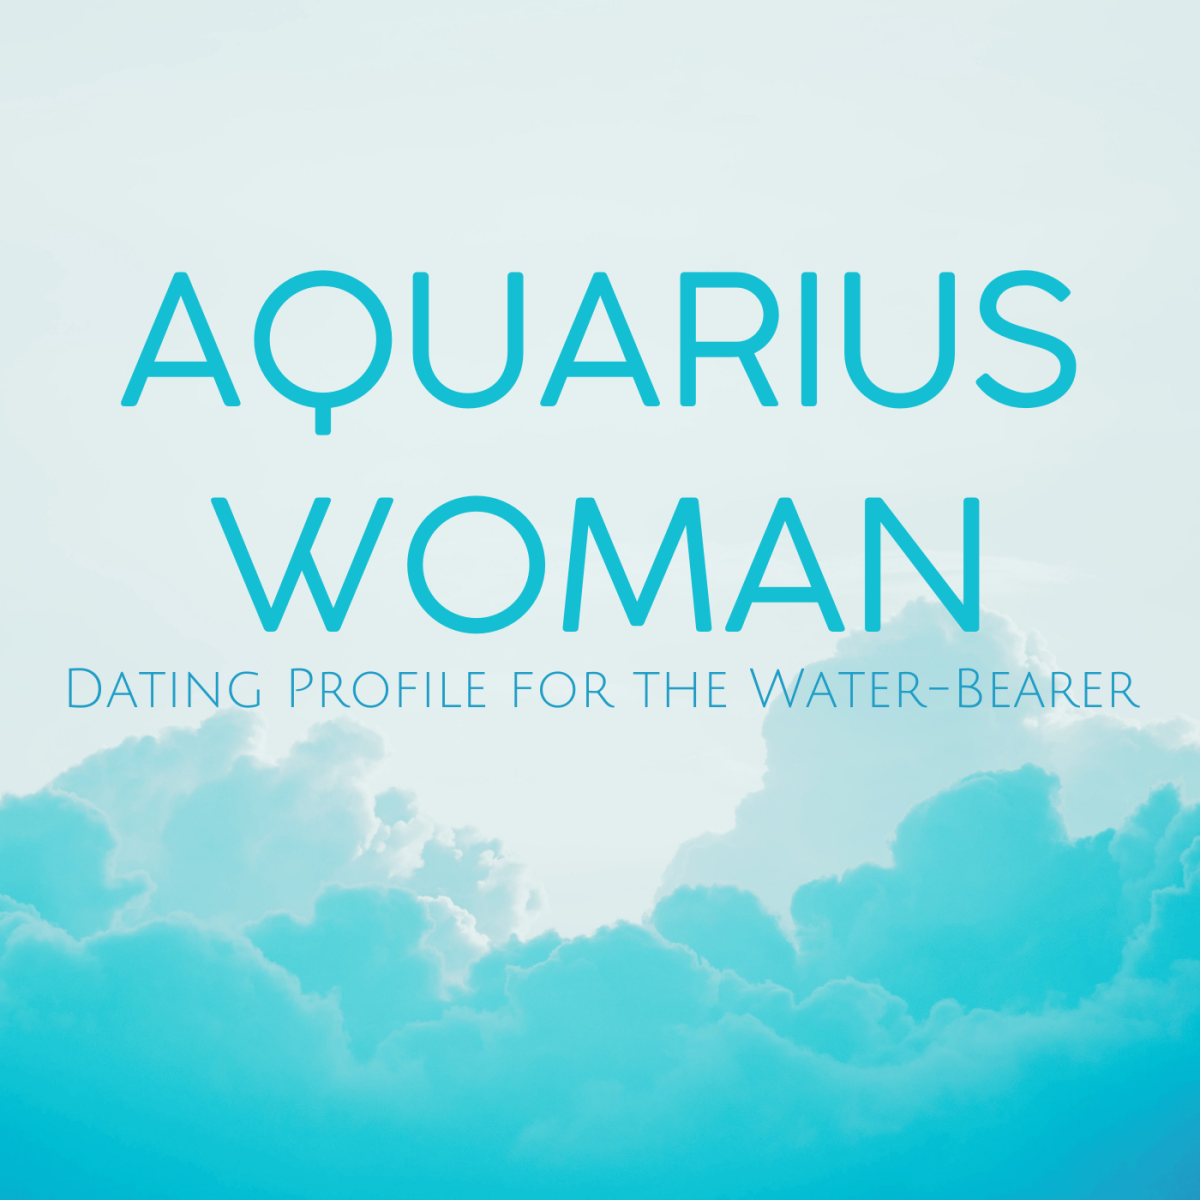 Tips for Dating an Aquarius Woman